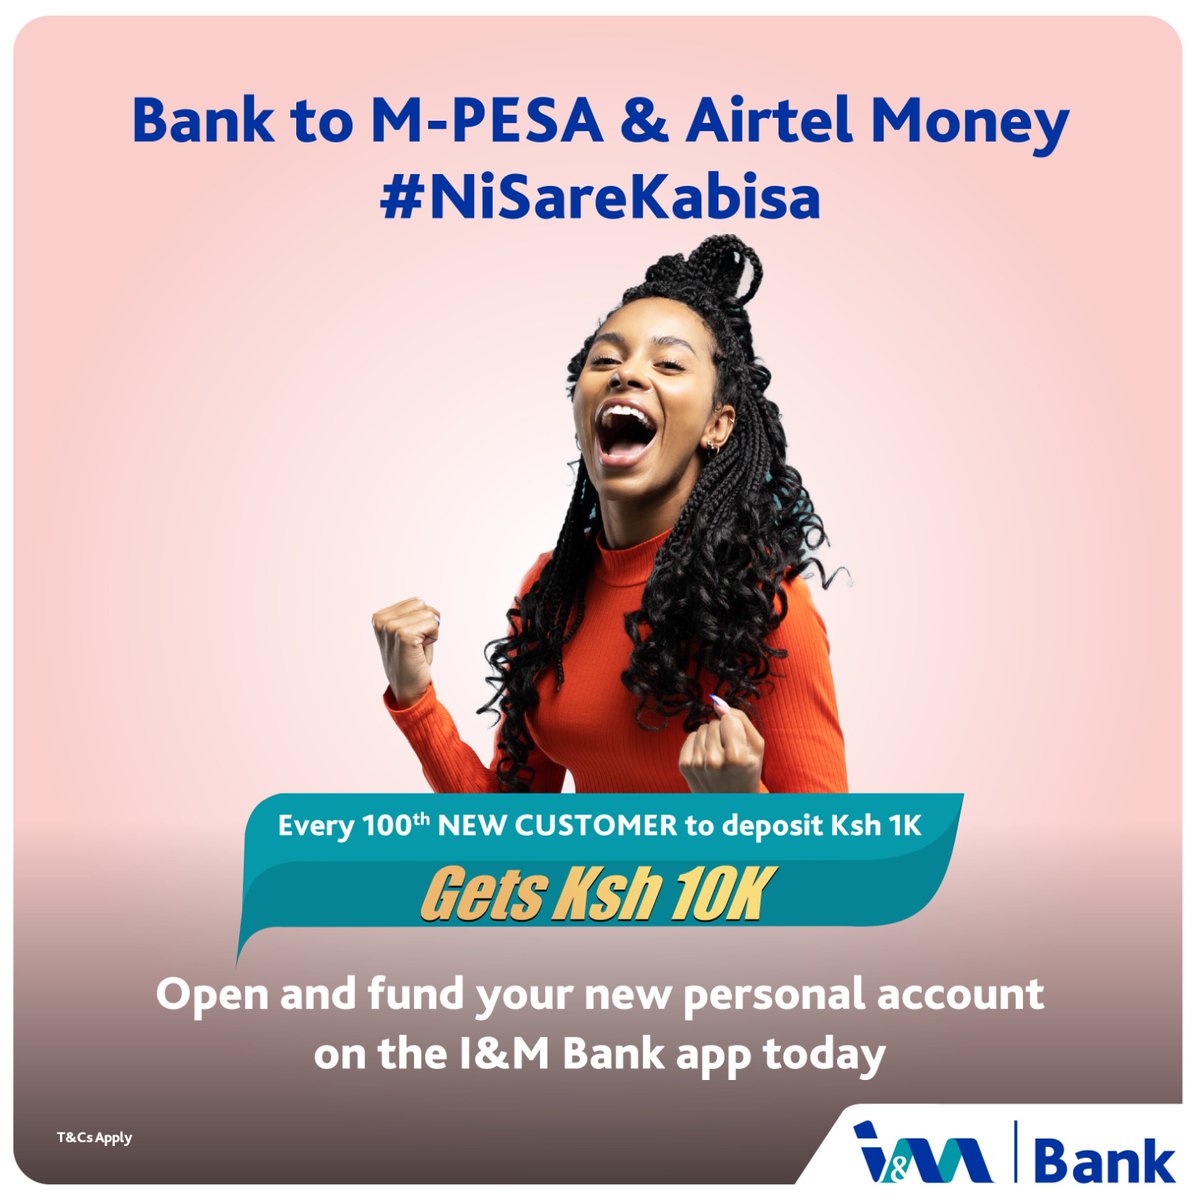 I&M bank allows you to transfer money from your back account to your mobile money for free
#NiSareKabisa
Free bank to Mpesa